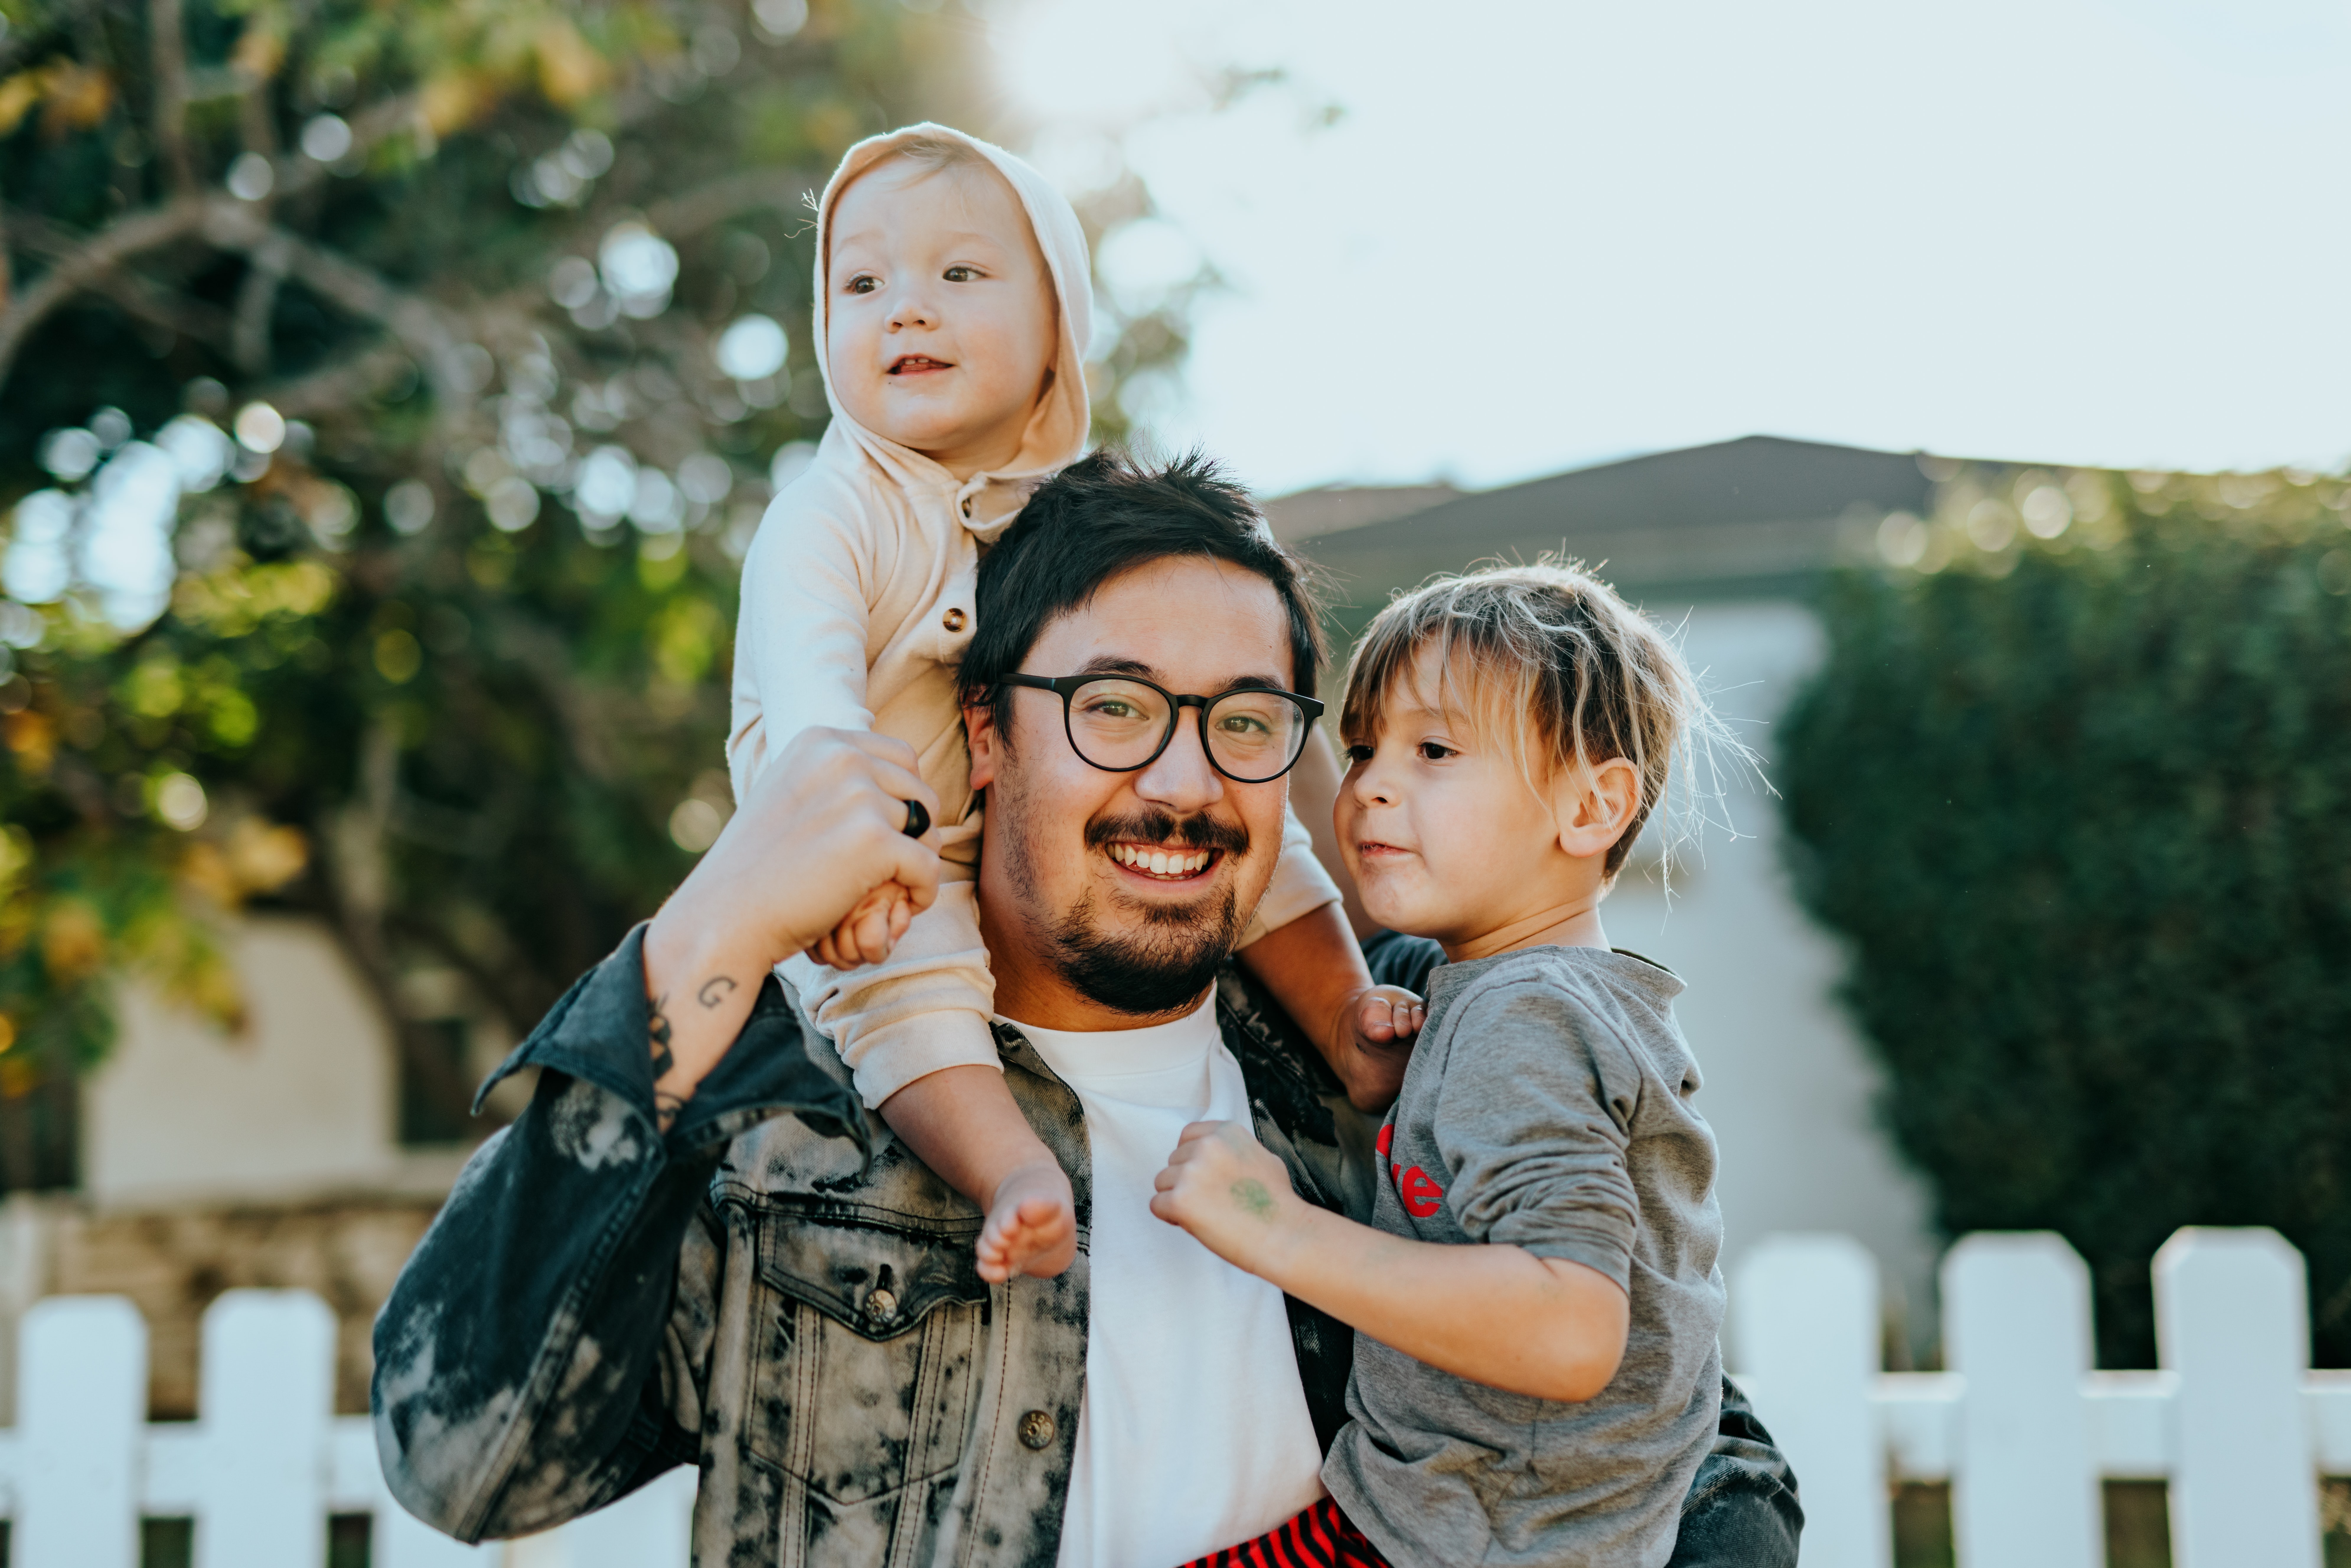 nathan dumlao Wr3comVZJxU unsplash How to Introduce a Child to a New Girl